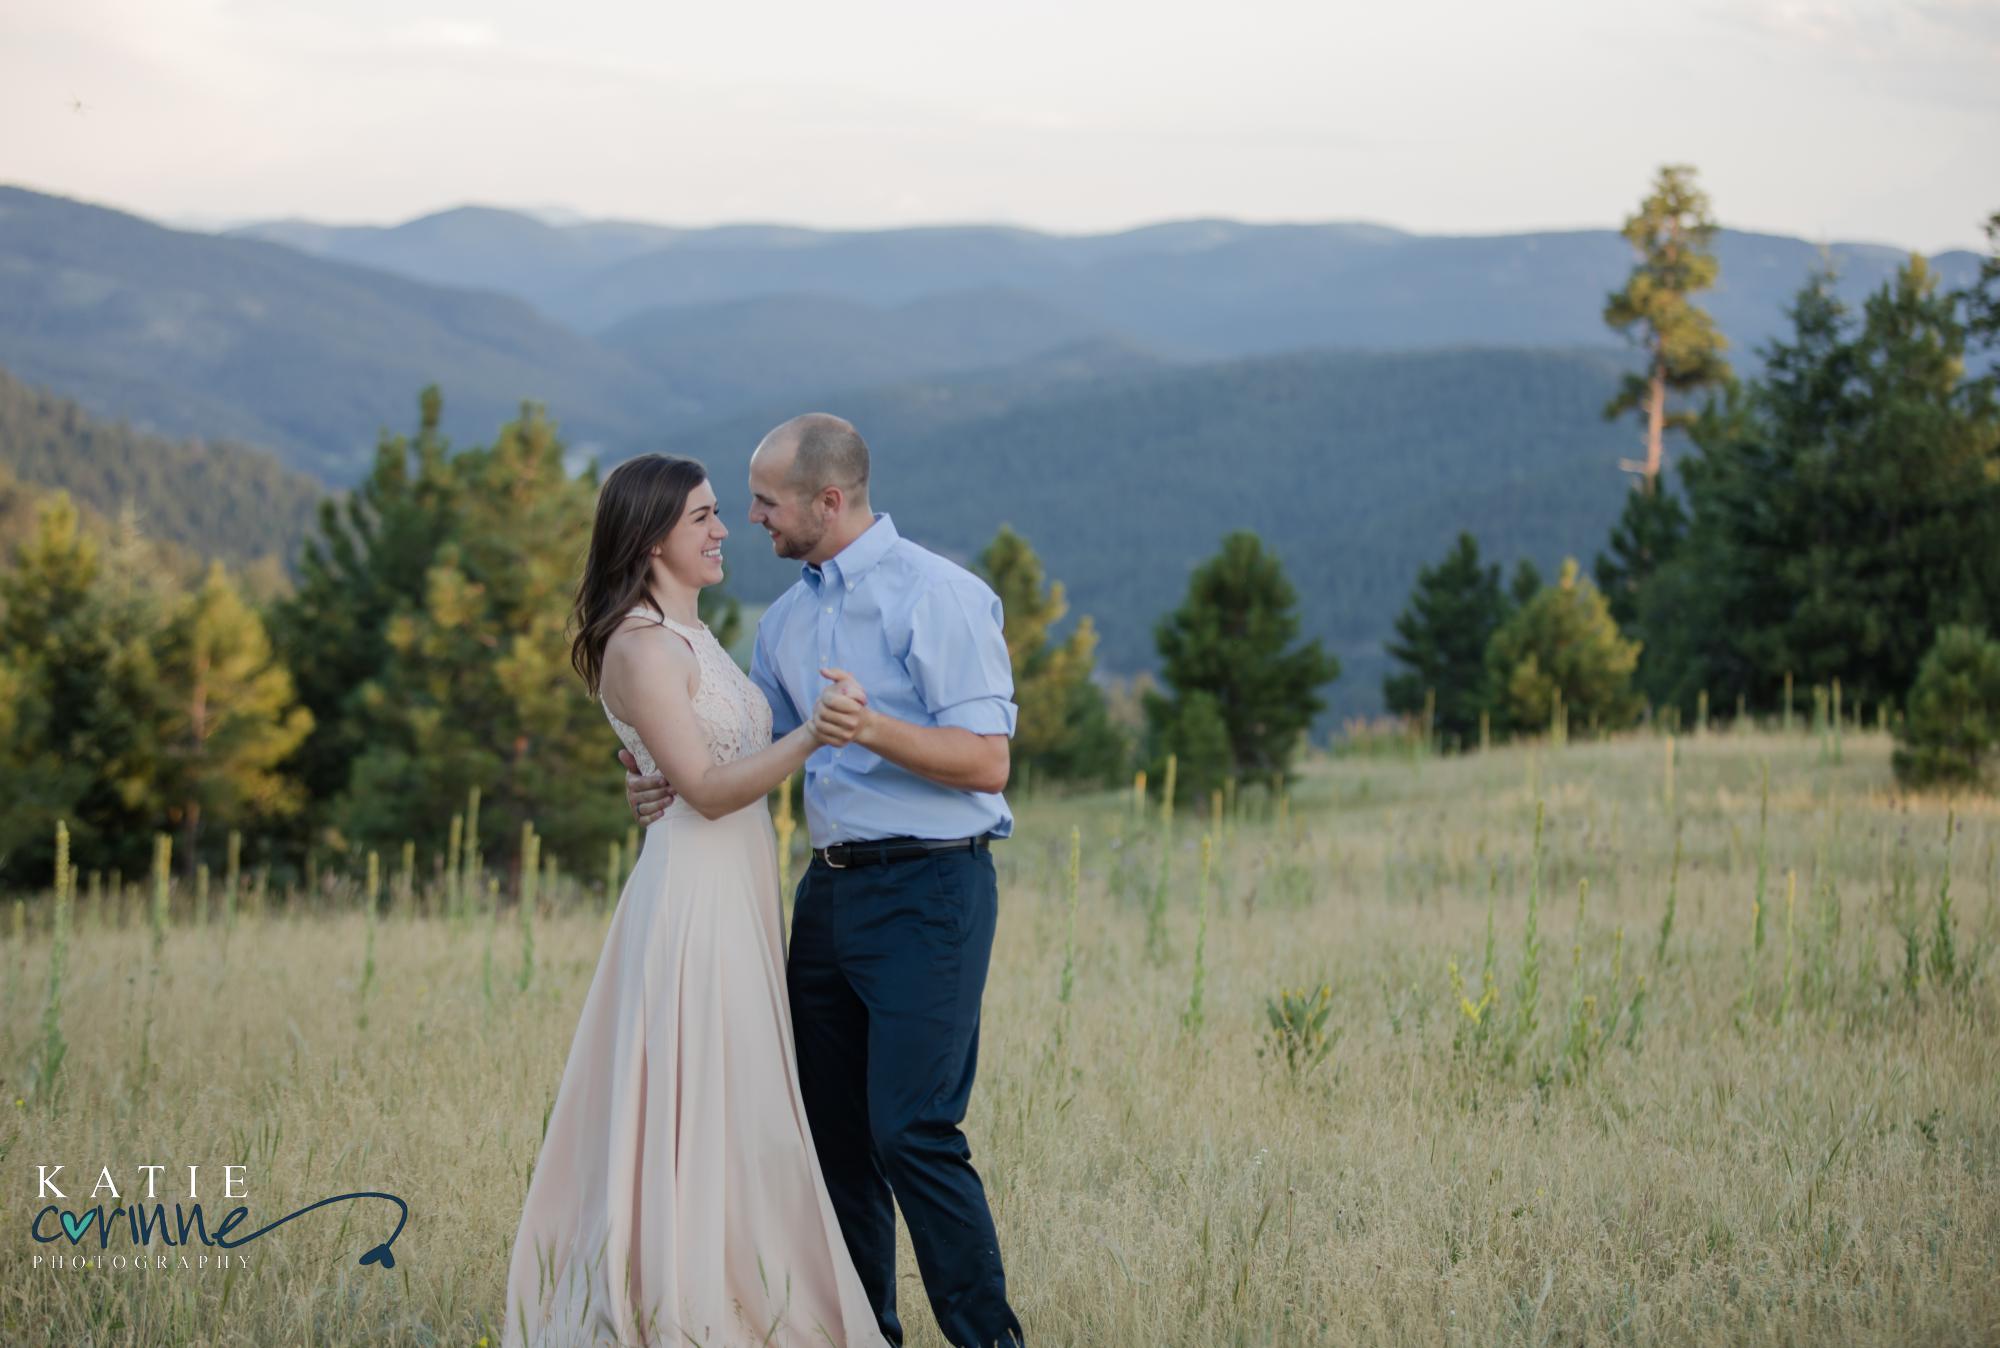 Cute engaged couple at Mount Falcon in Colorado